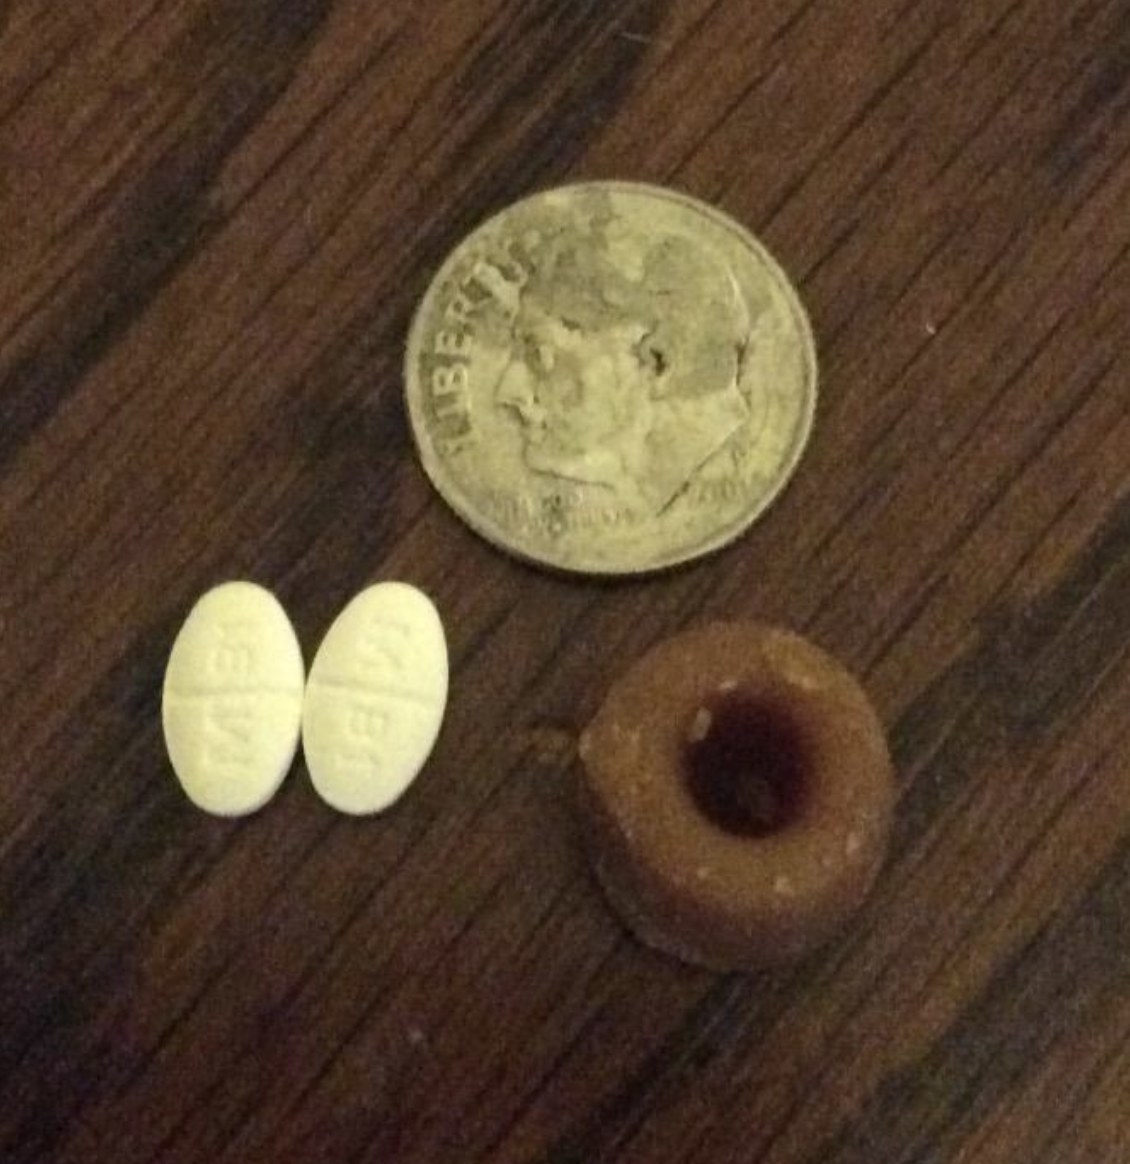 a feline greenies pill pocket next to two pills and a dime for size